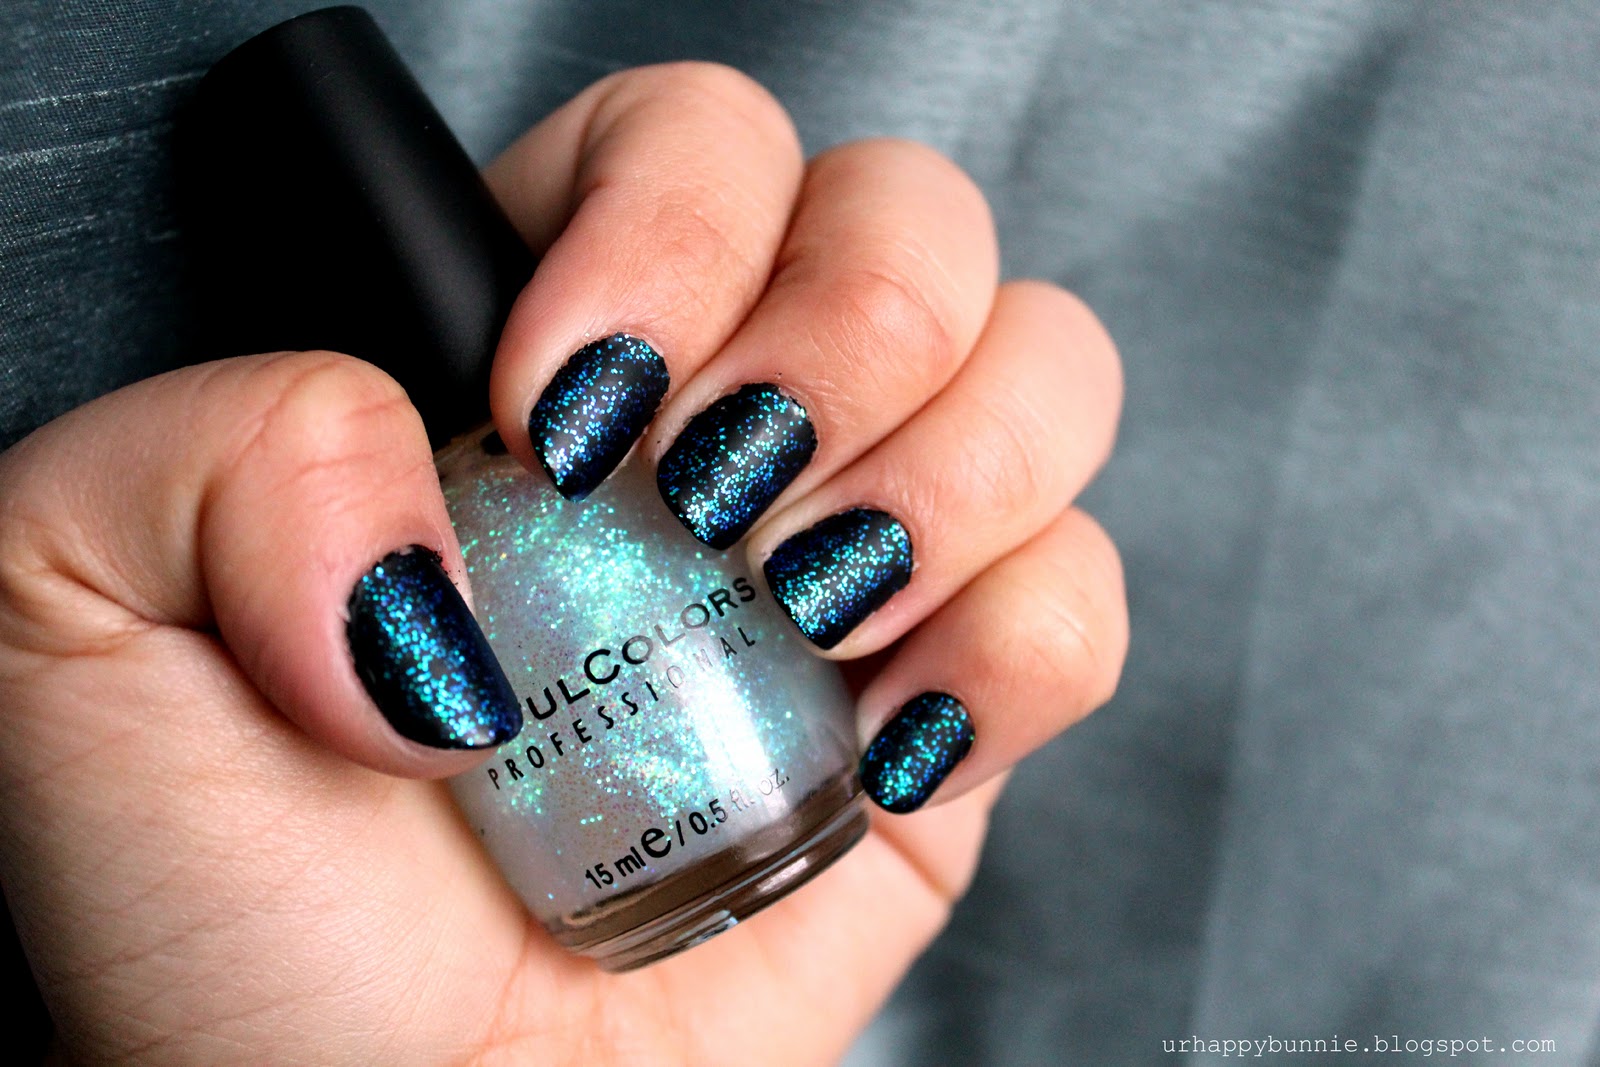 Amazing holographic glitter nail polish from Sinful Colors